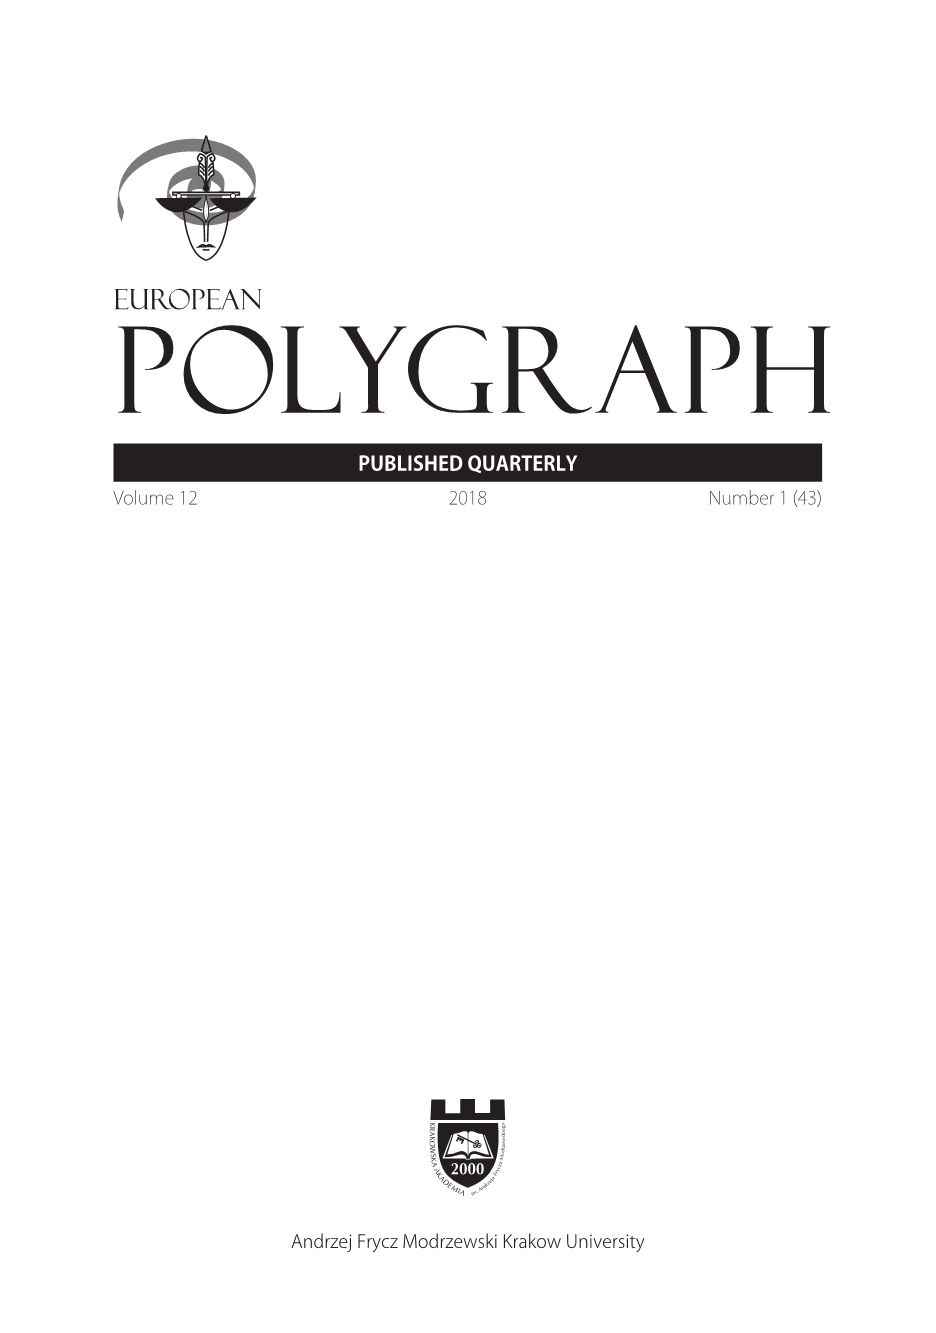 Diﬀerences in the Quality of the Photoplethysmograph Polygram Signal in Subjects with and without Nail Polish